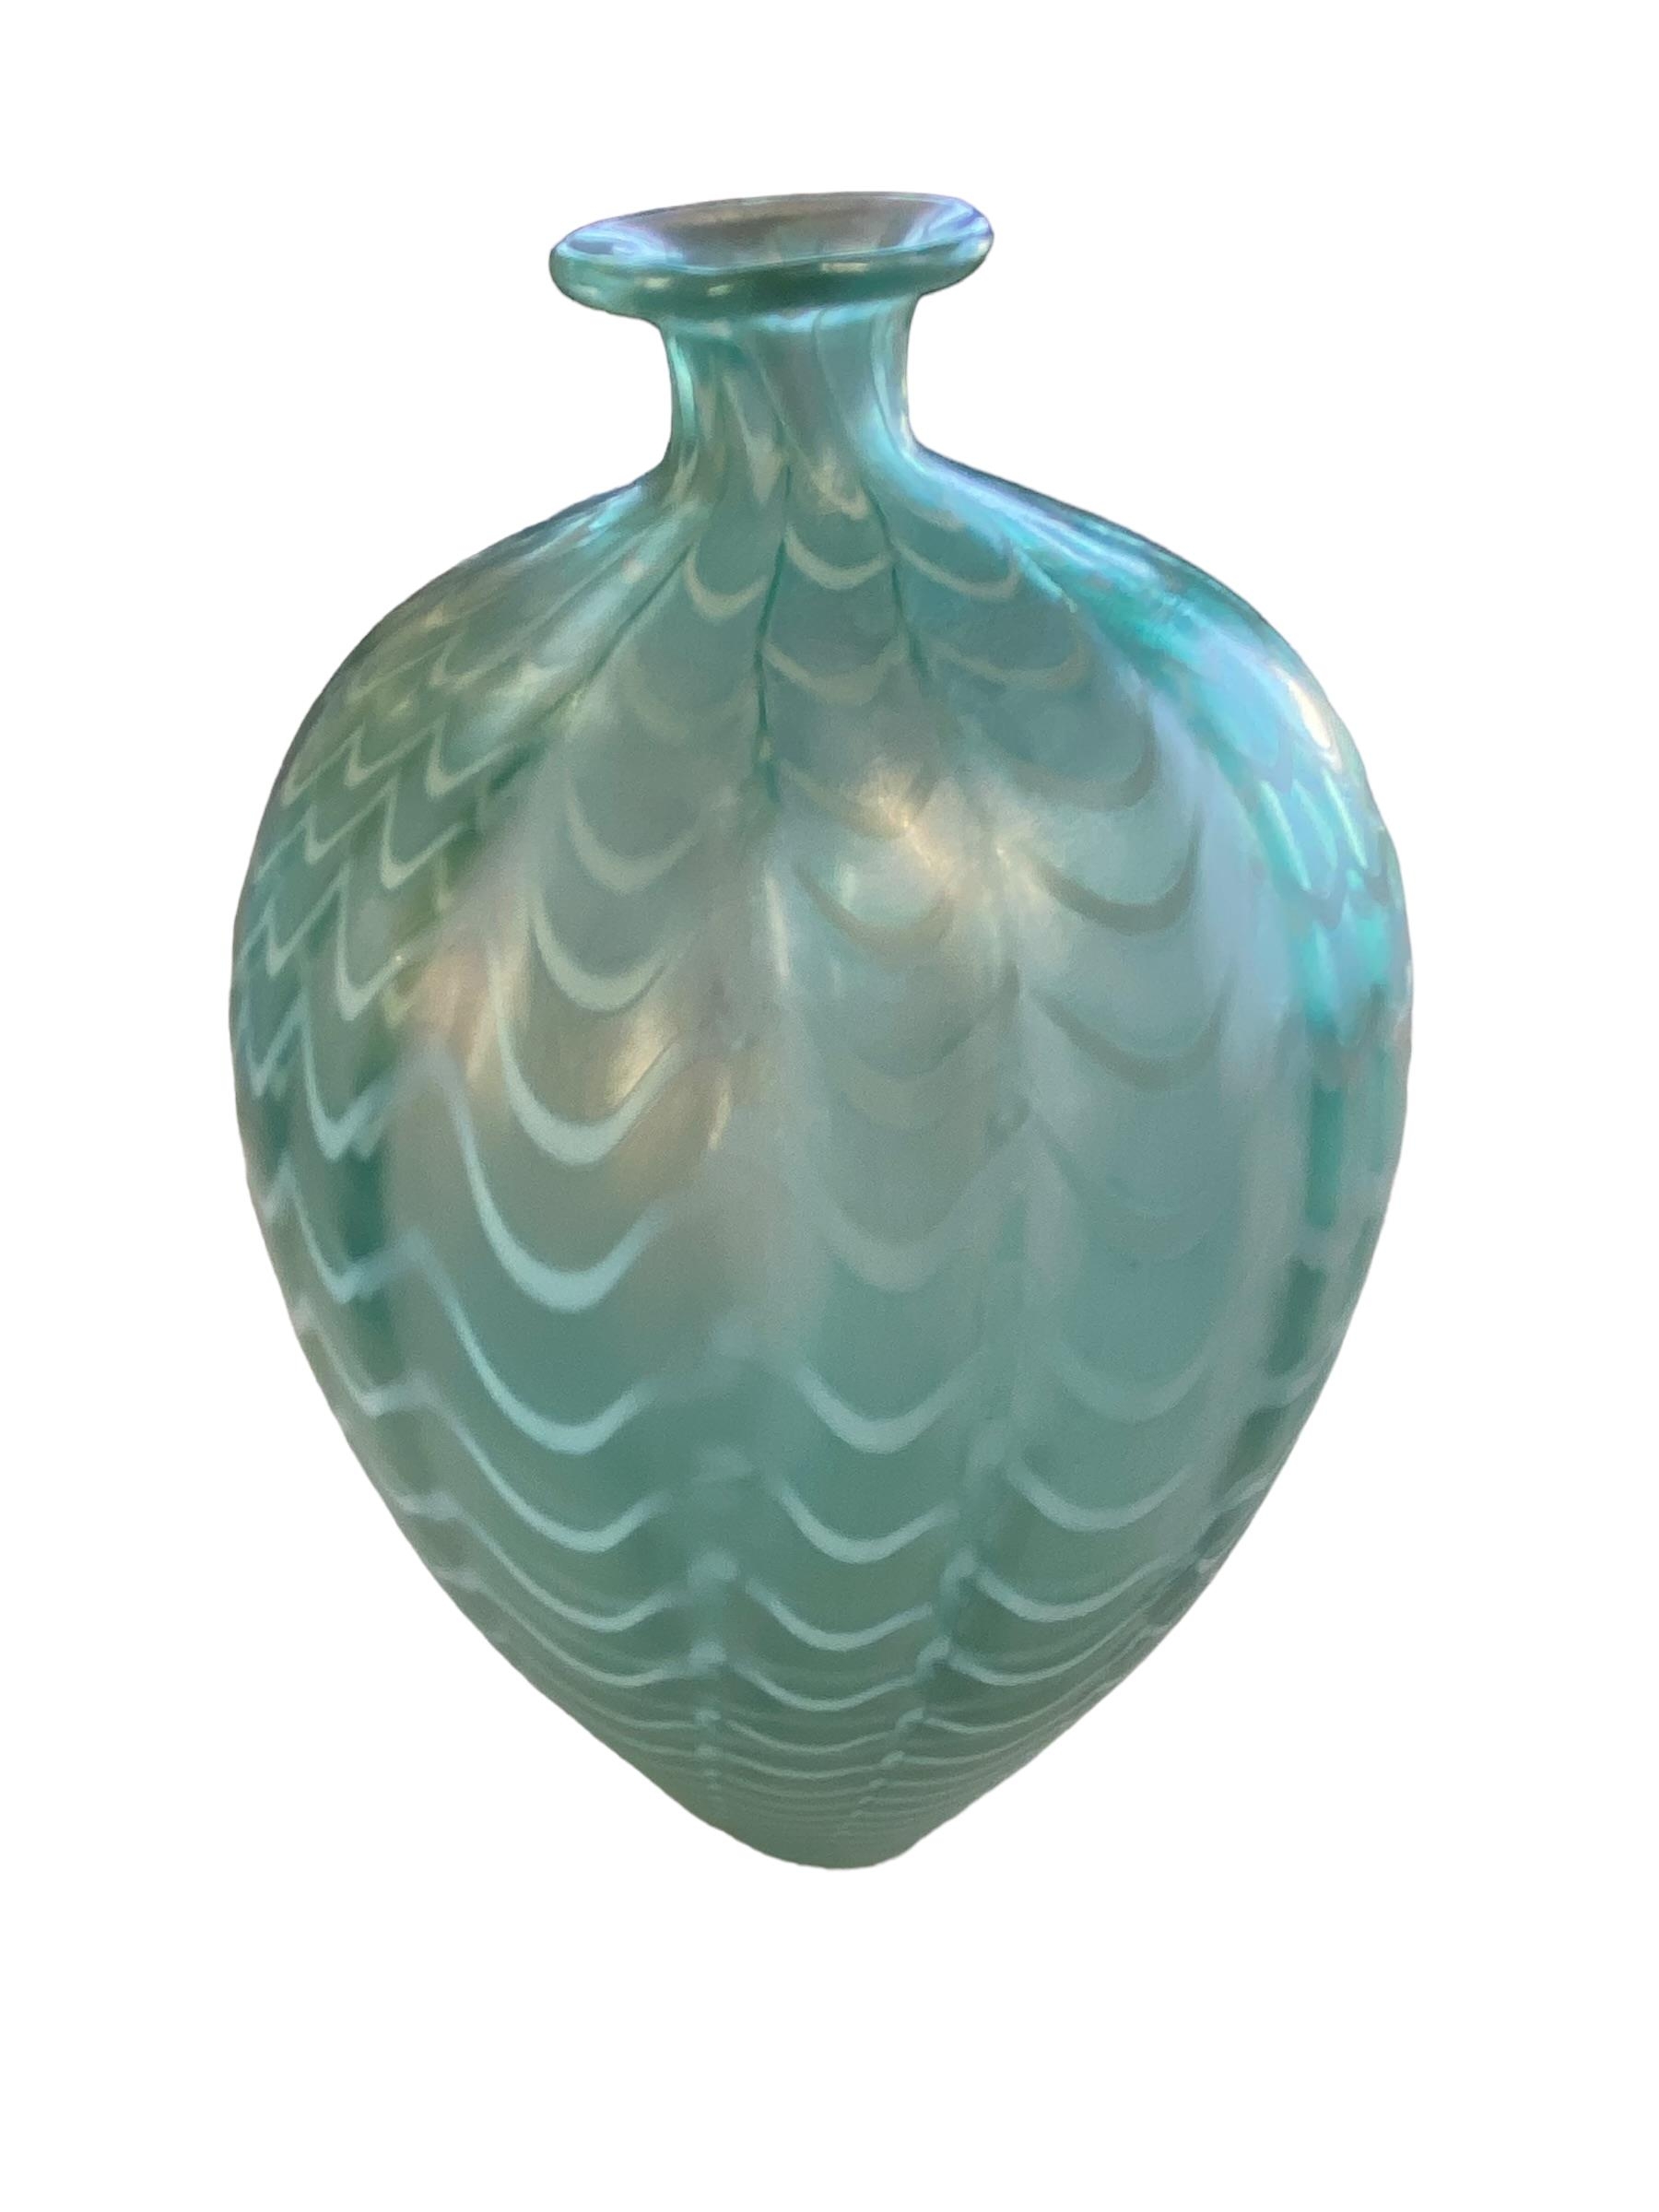 A Swedish green and opalescent blown glass vase by Bertil Ballien for Kosta Boda signed and numbered - Image 2 of 2